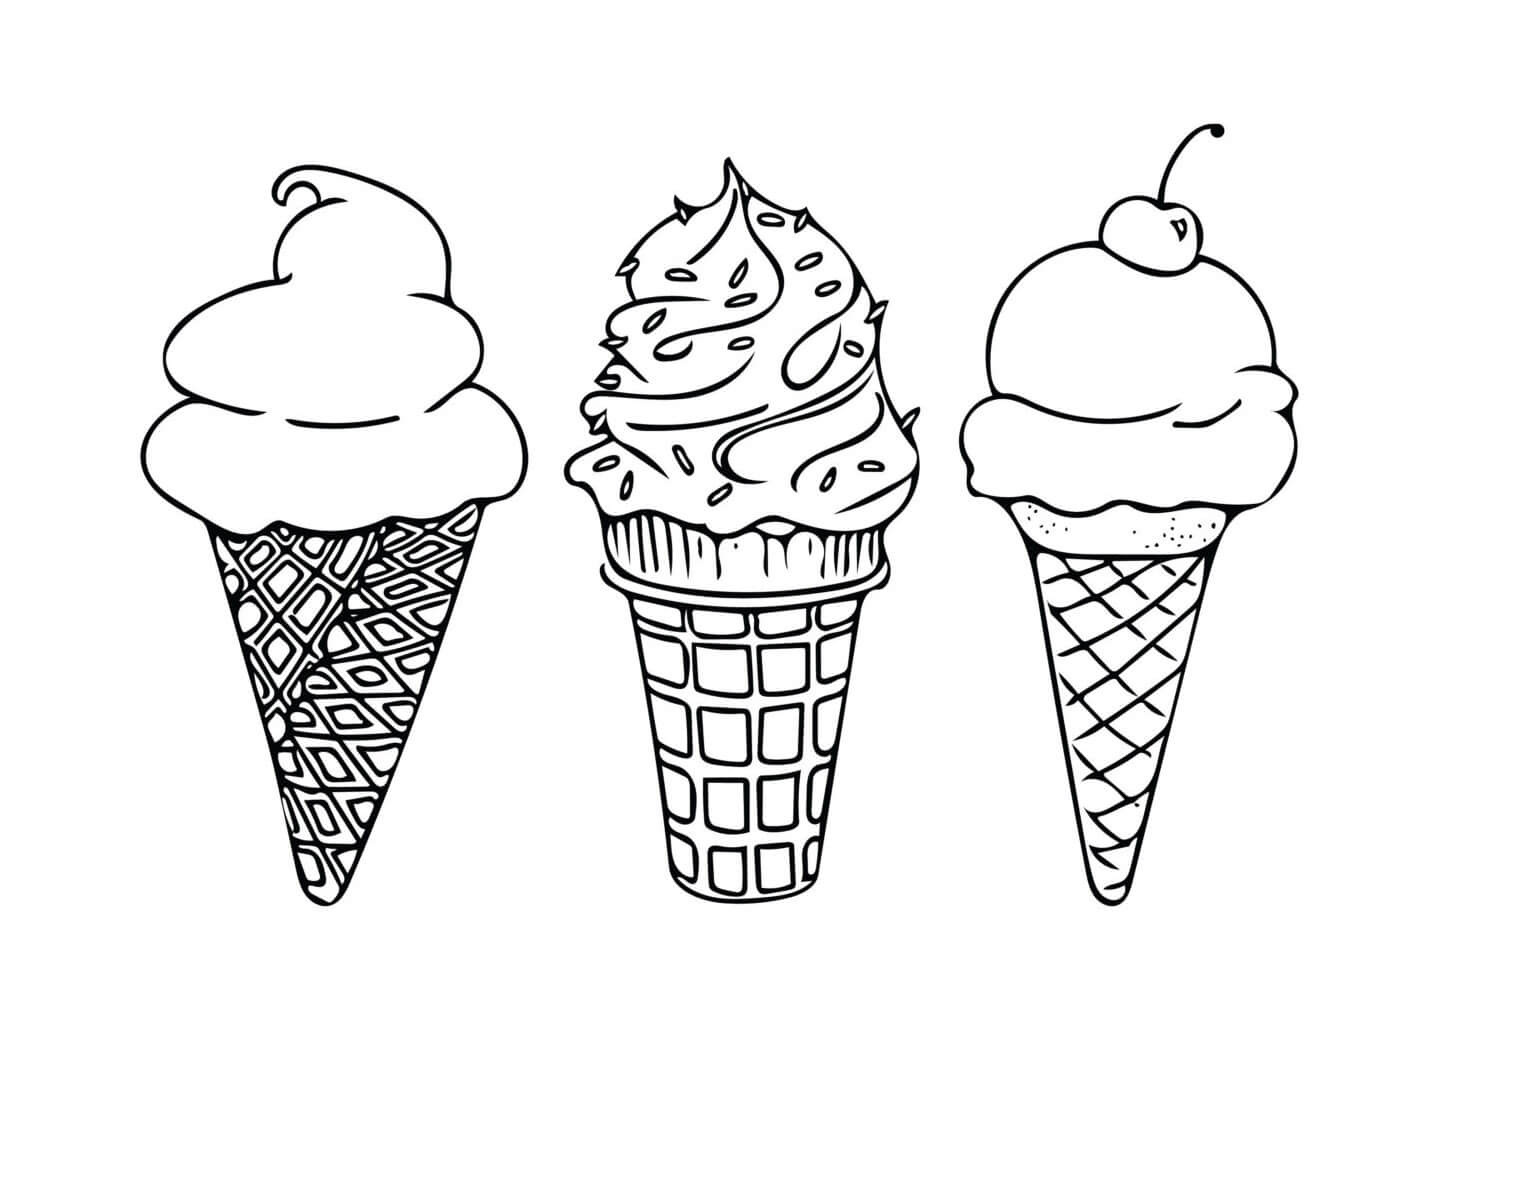 Delicious Ice Cream Coloring Page   Free Printable Coloring Pages ...